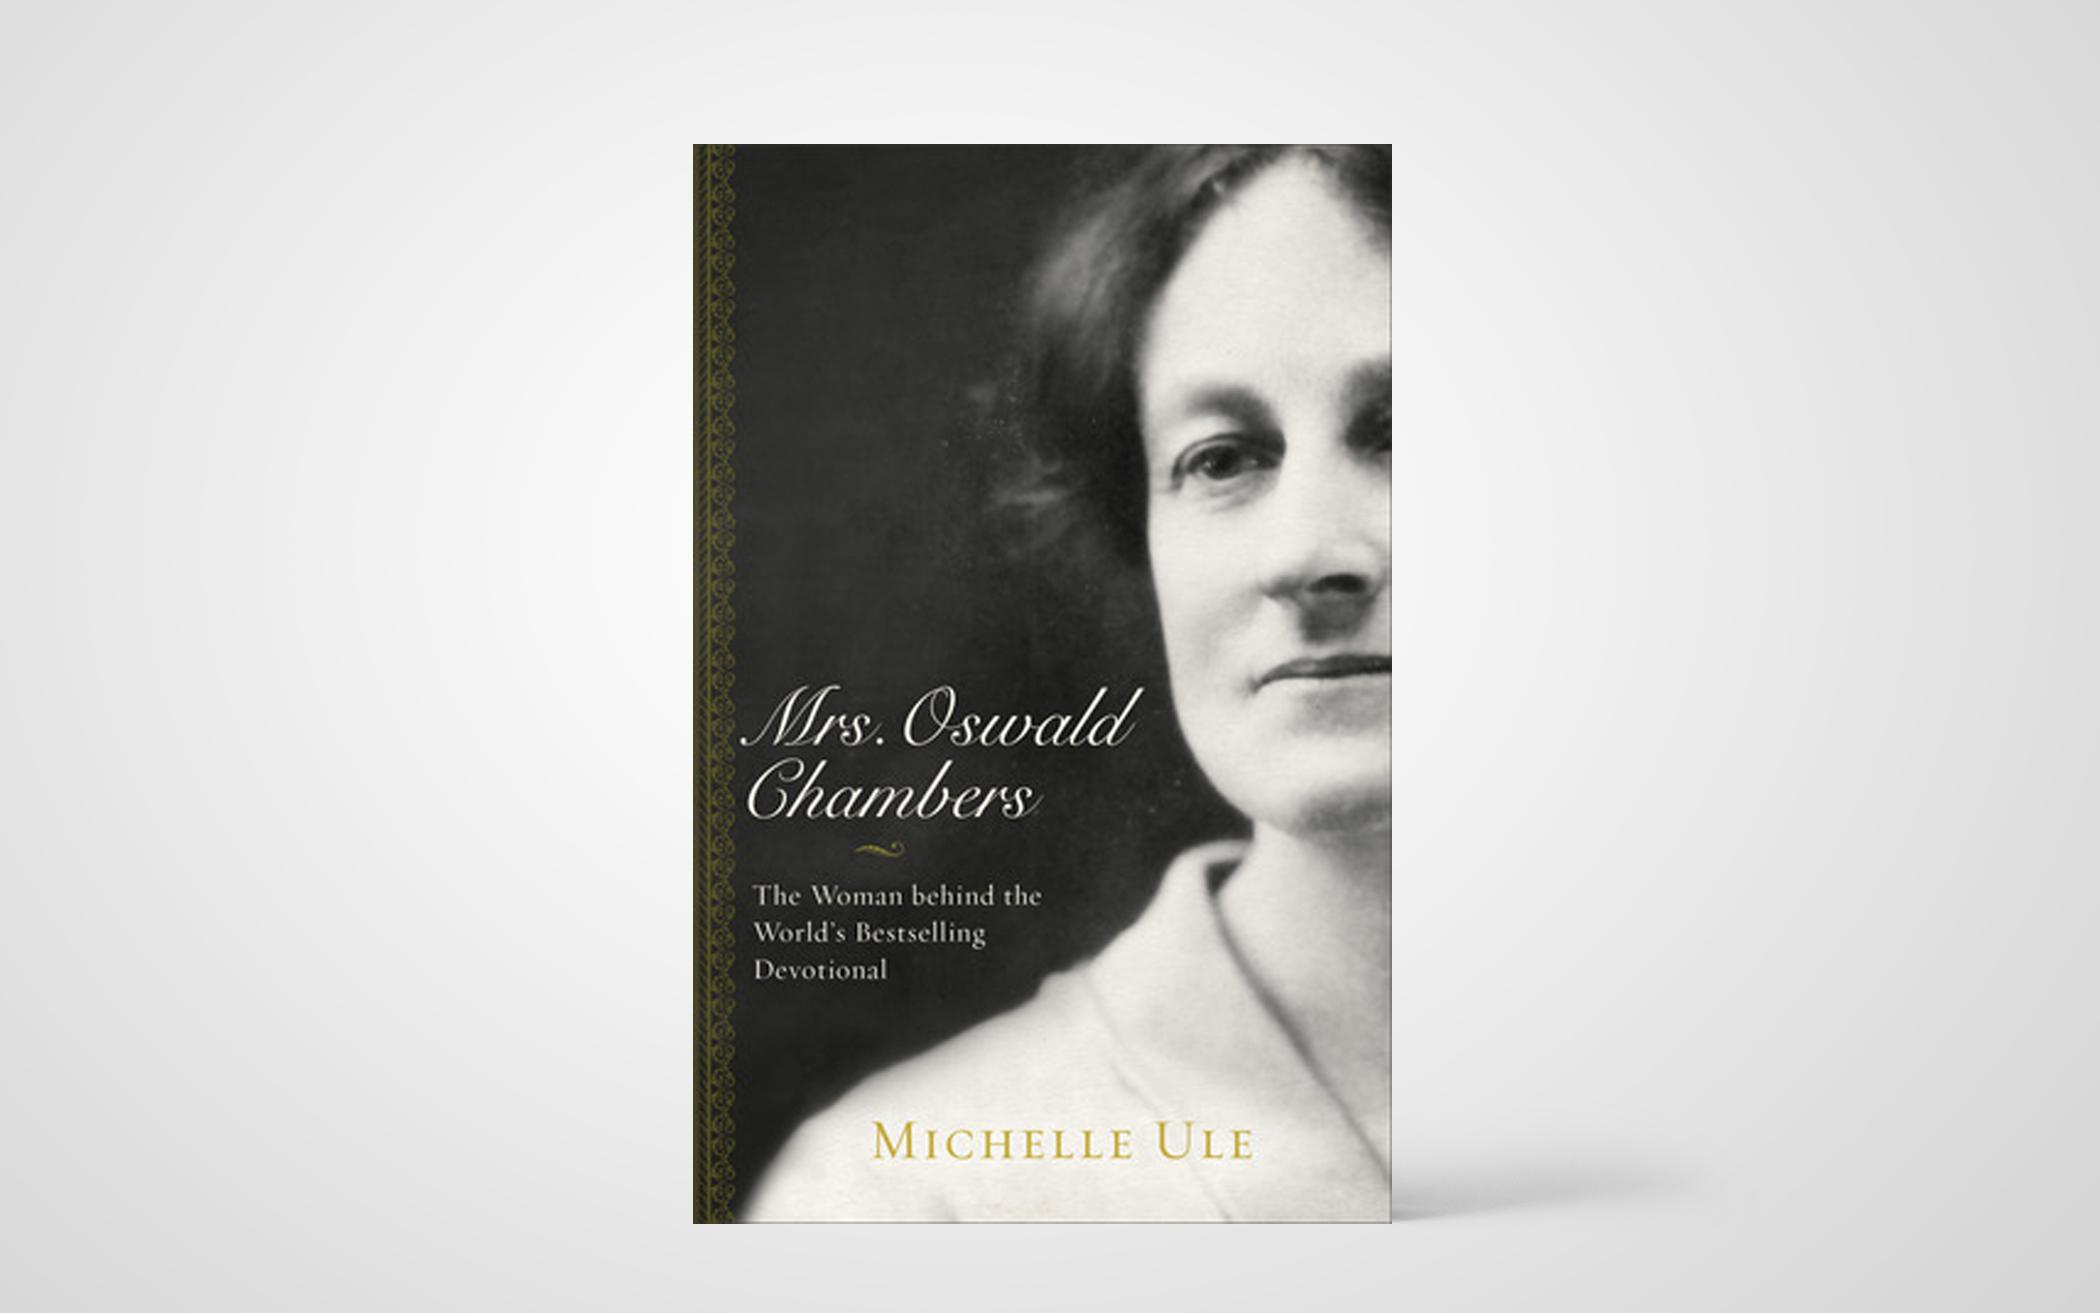 Mrs. Oswald Chambers: The Woman Behind the World’s Bestselling Devotional